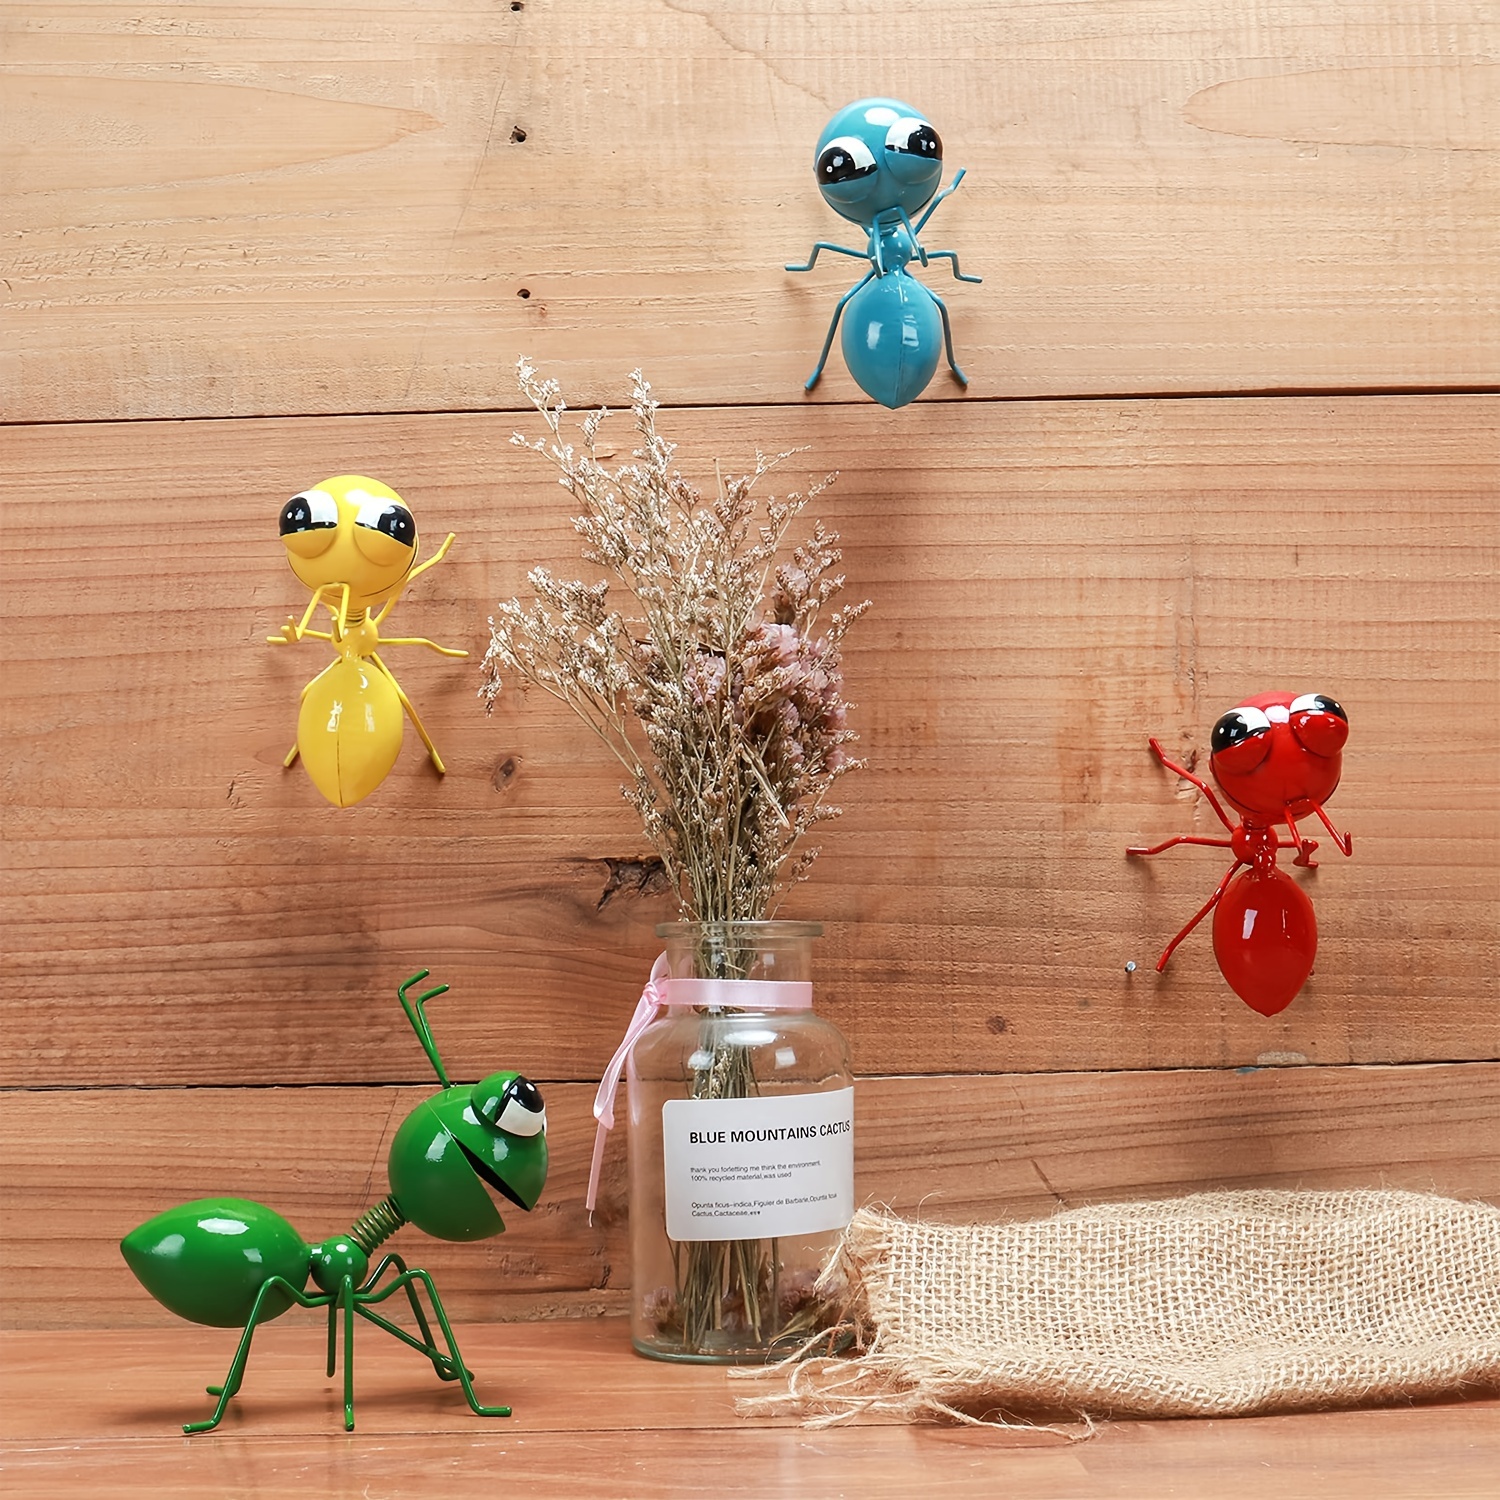 Metal Ant A Group Of 4 Colors Cute Insect For Hanging Wall Art Garden Lawn  Decor Indoor Outdoor Wall Sculptures